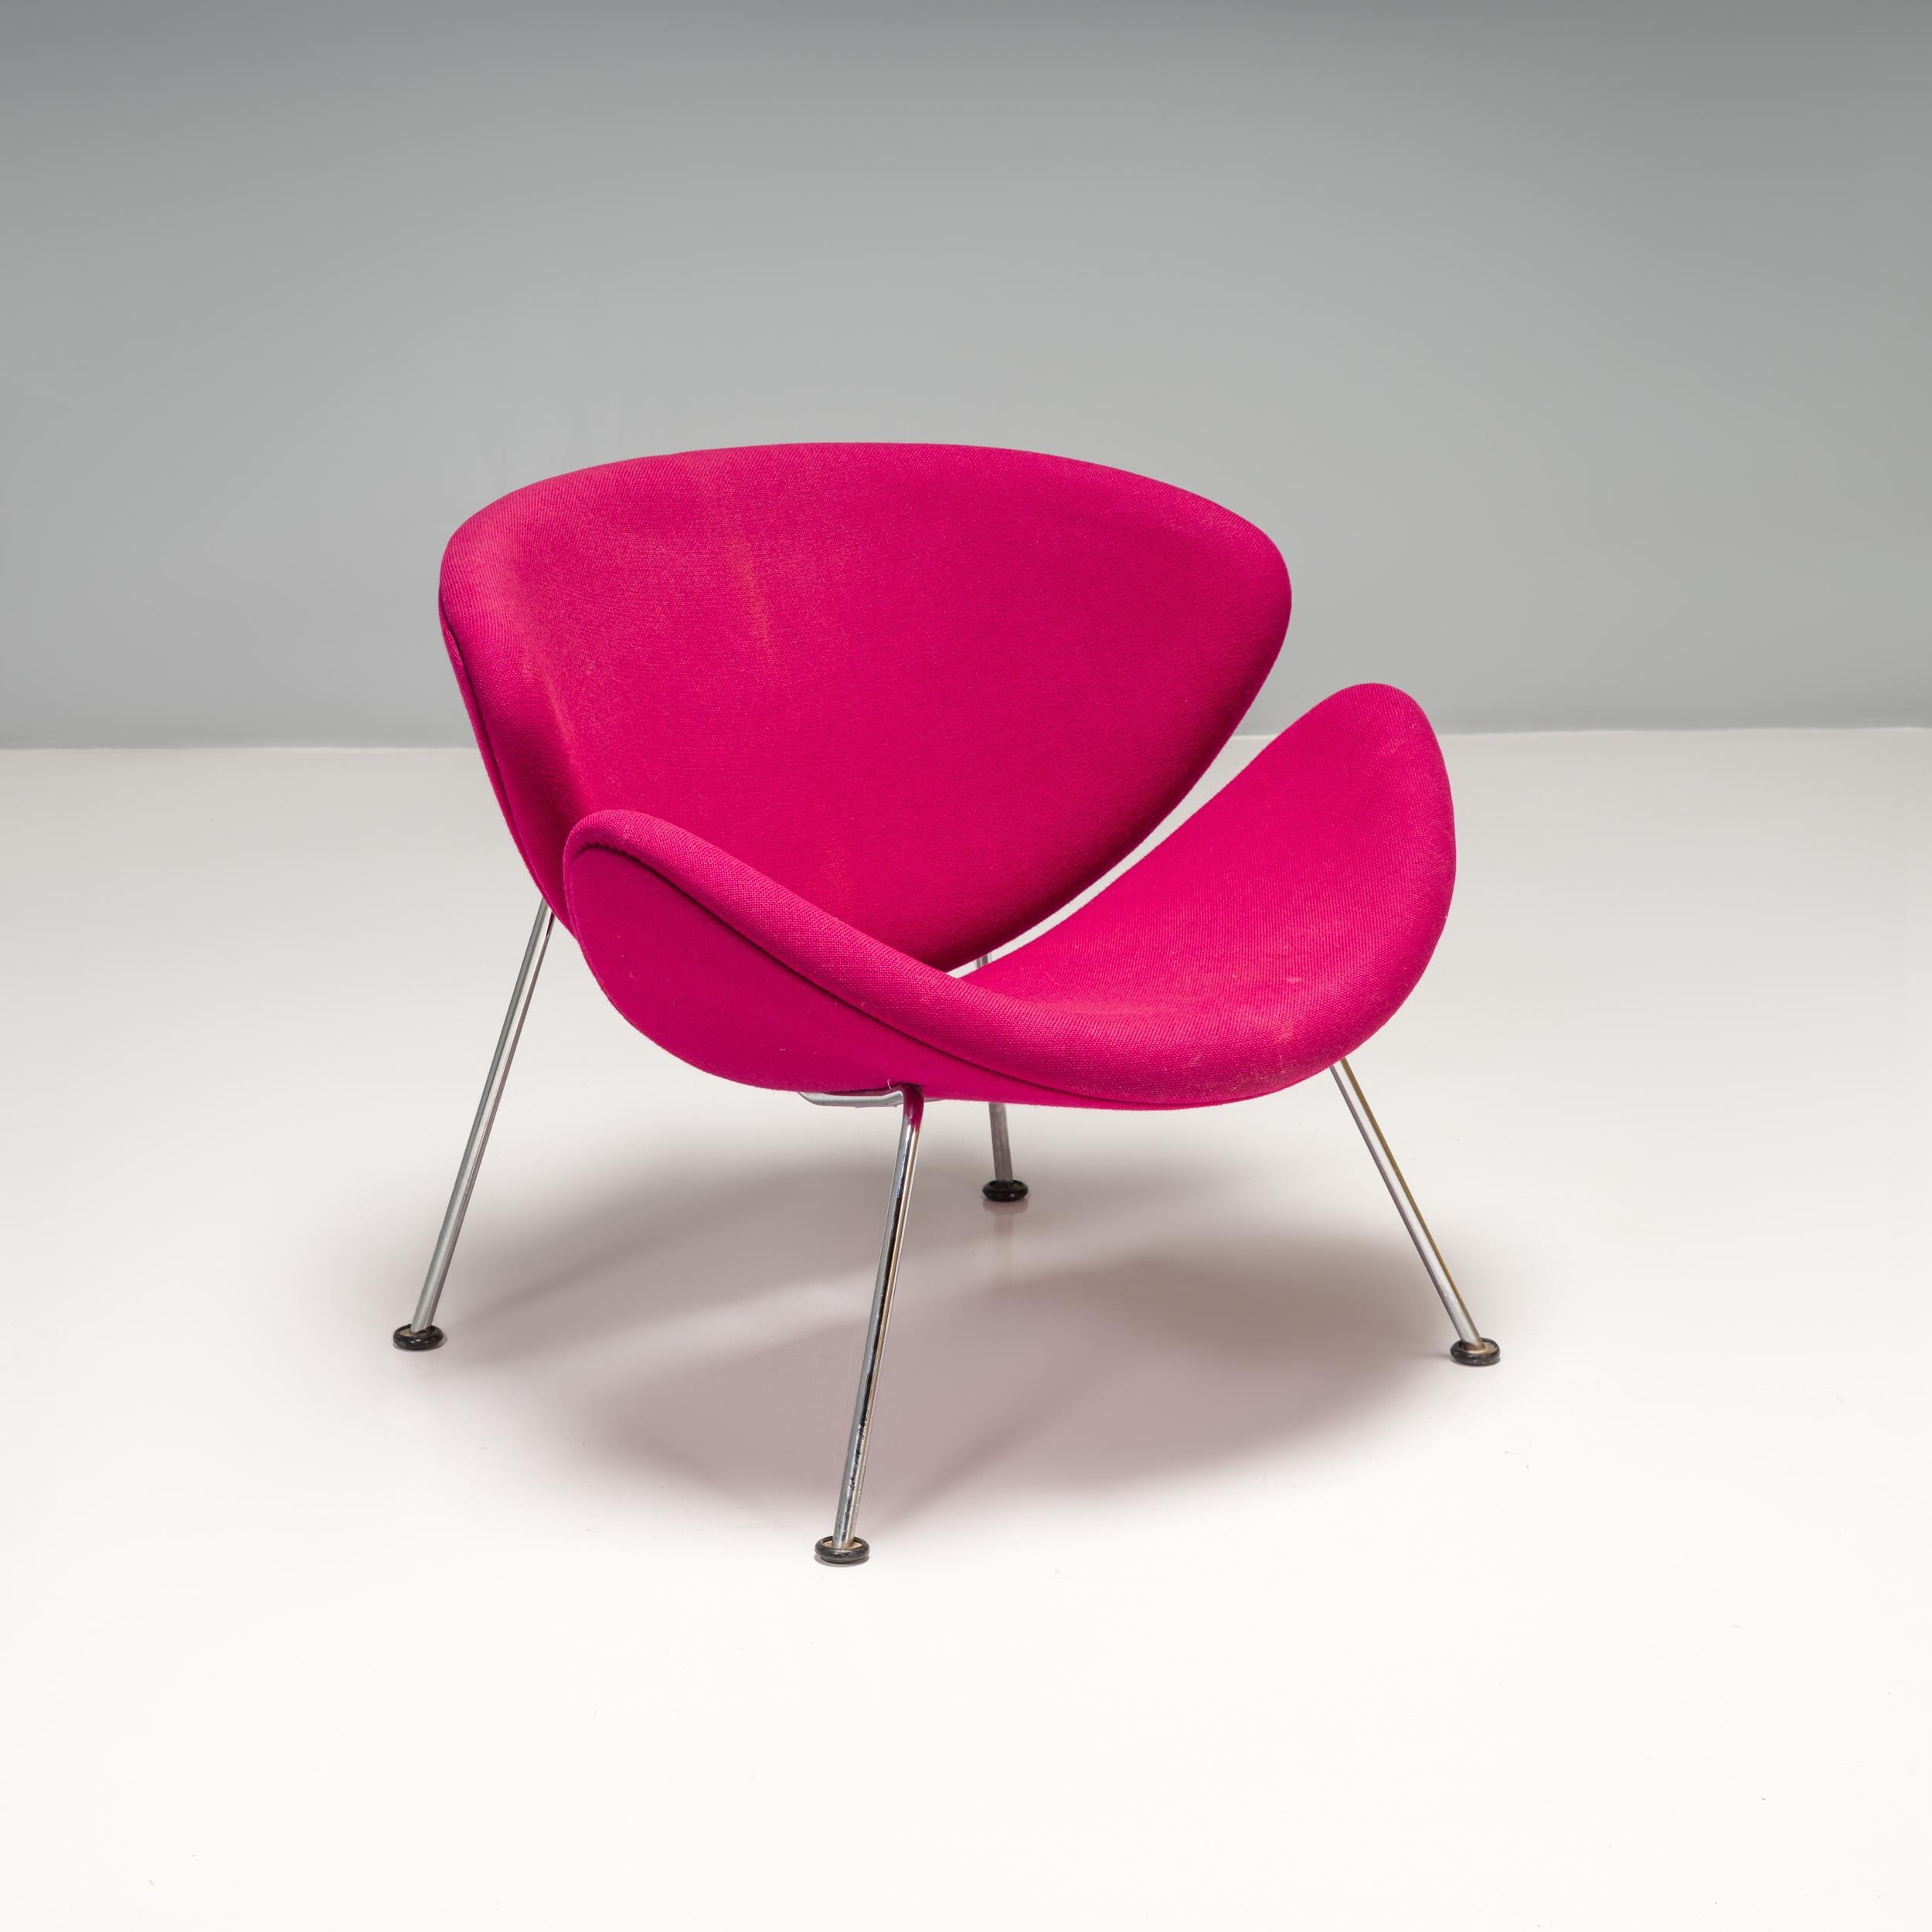 Originally designed by Pierre Paulin in collaboration with Artifort in the 50s, the Orange Slice chair was not manufactured until 1960, and has since gone on to become a design icon.

The unique design was conceived after Paulin began using the